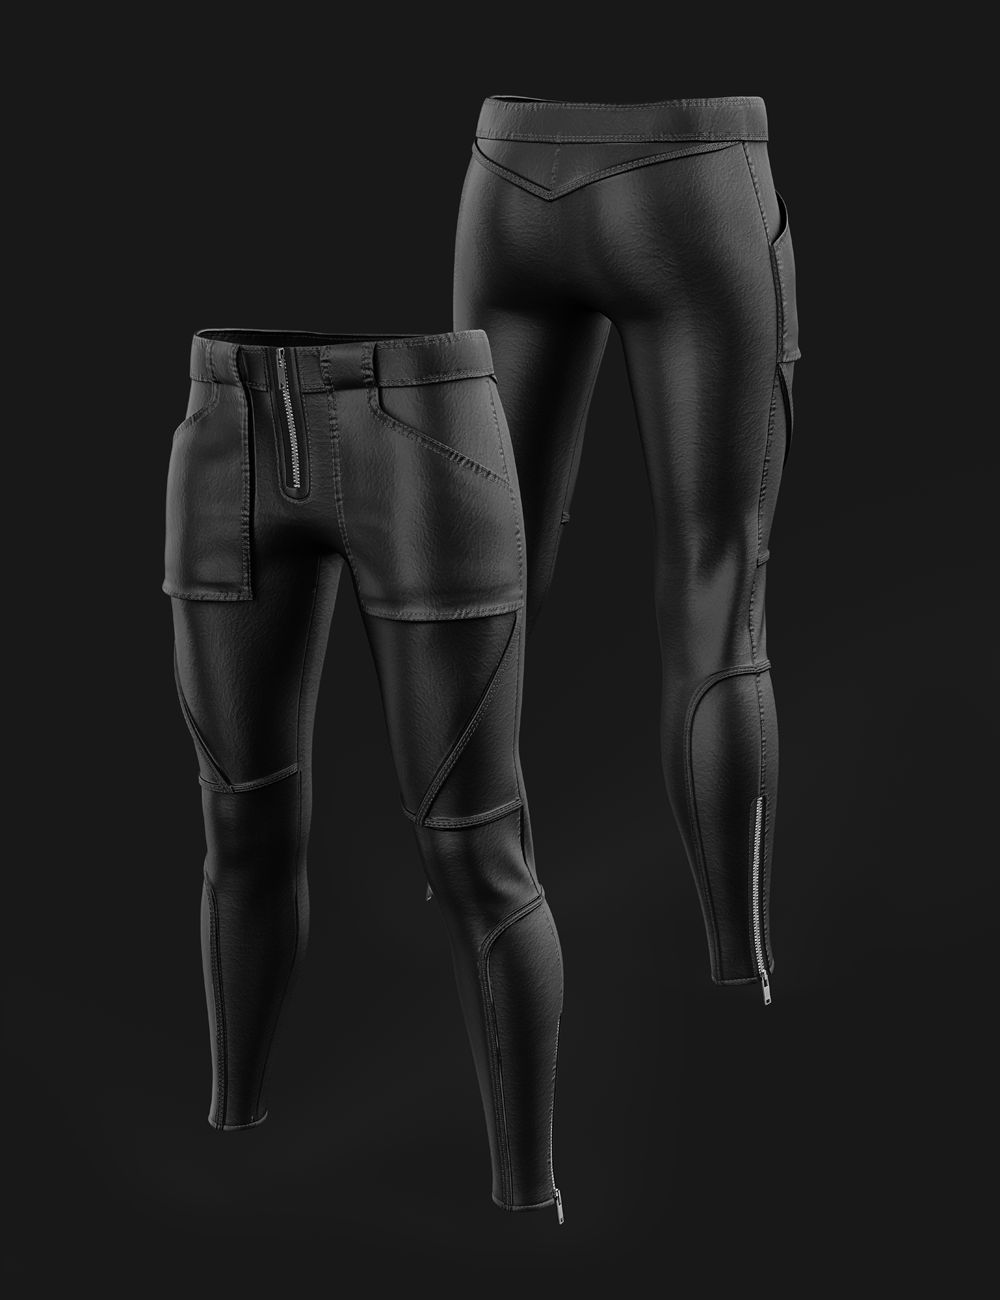 AJC Glamor Biker Outfit Pants for Genesis 8 and 8.1 Females by: adeilsonjc, 3D Models by Daz 3D